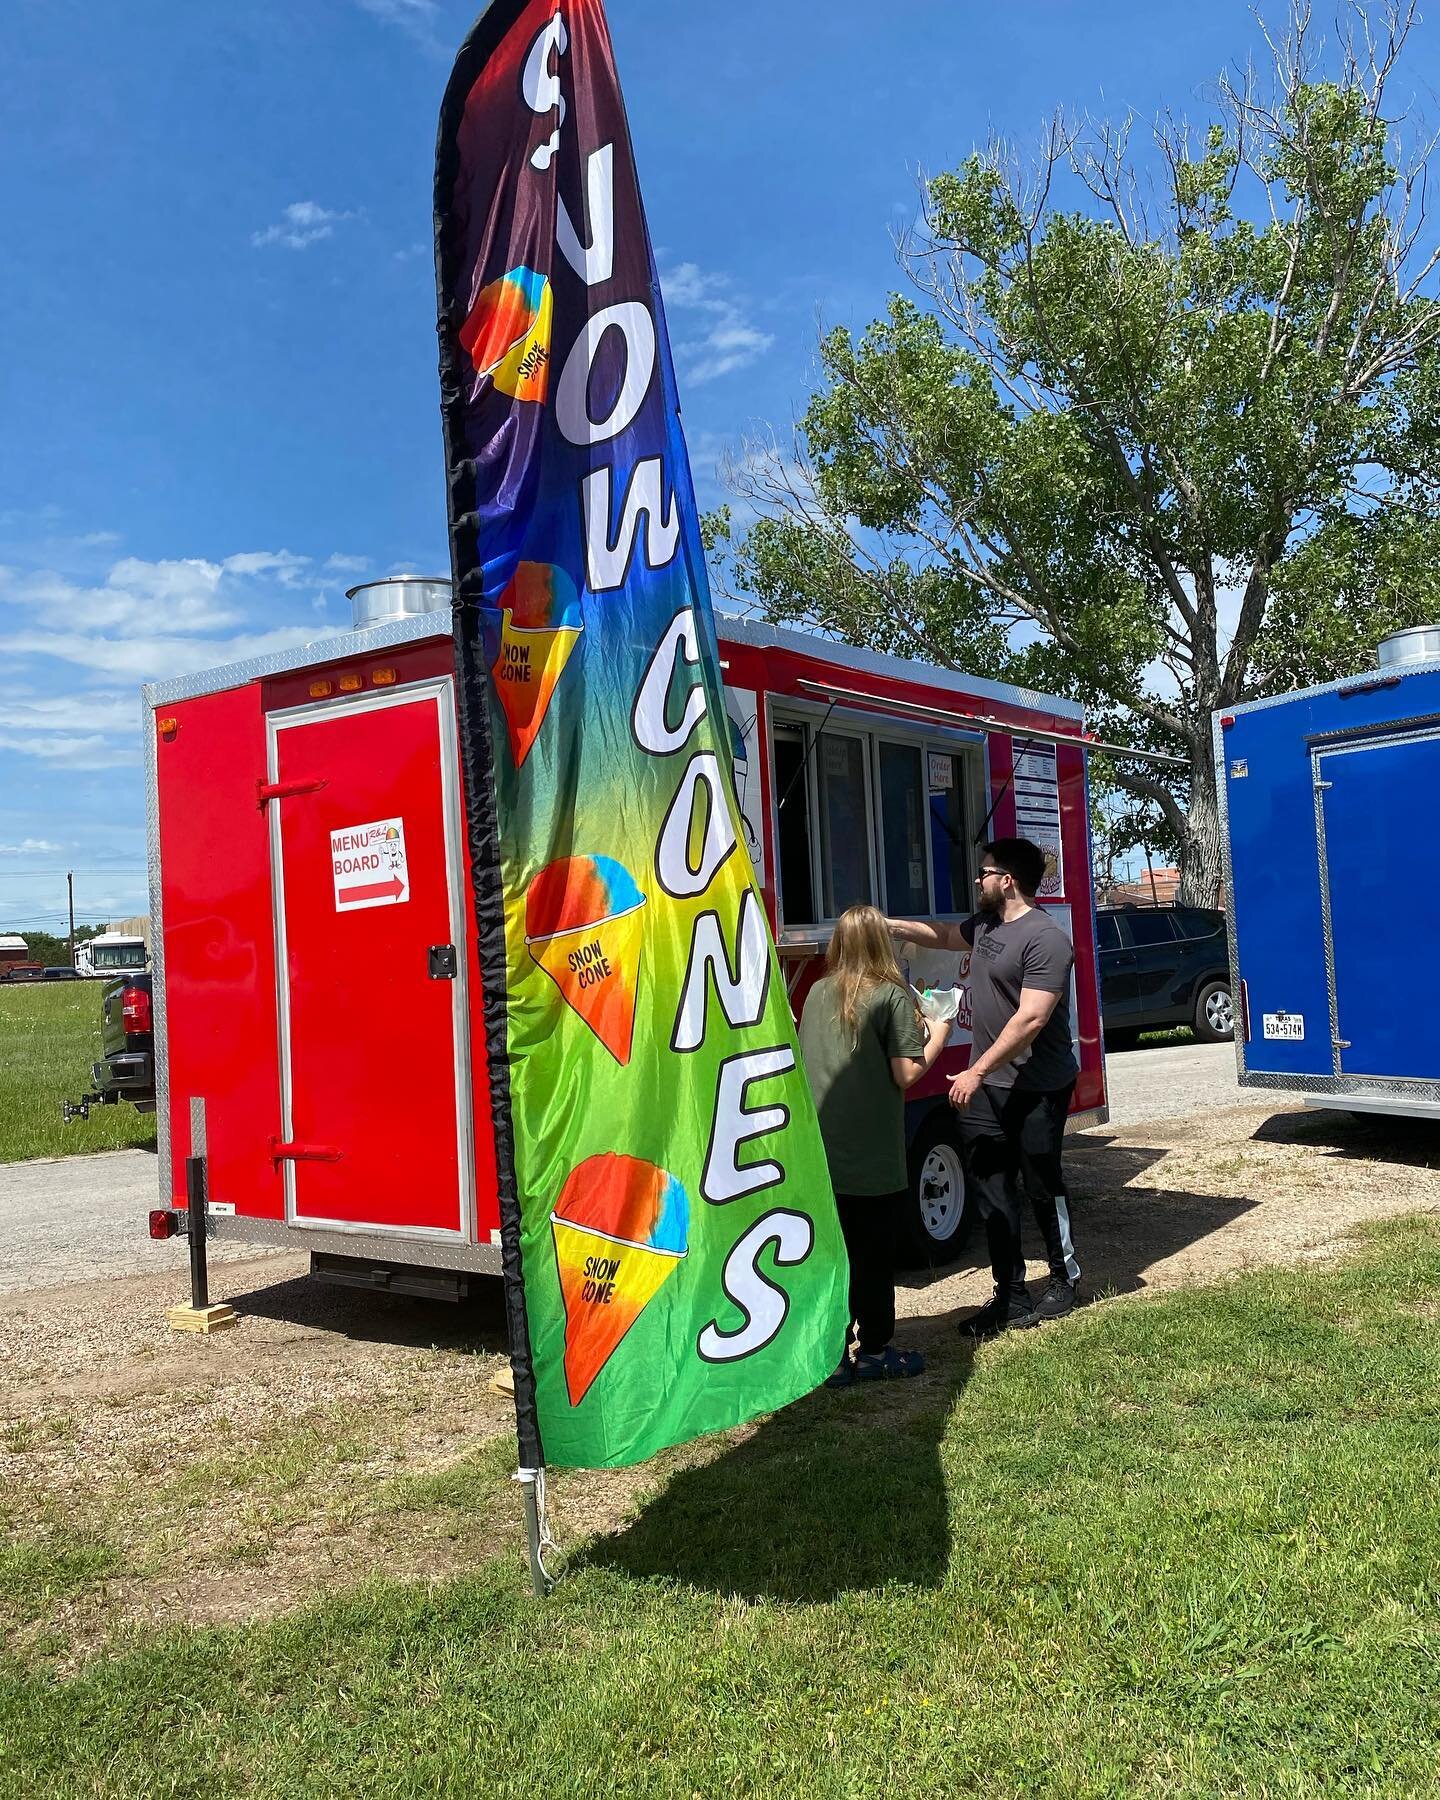 Shop the Downtown Forney Market @forneymarket today on the grounds of the old Murray Cotton Gin! 210 E. Broad St. #forneyarts #artisanmarket #forneytx #dfwevents #artisanmade #foodtrucks